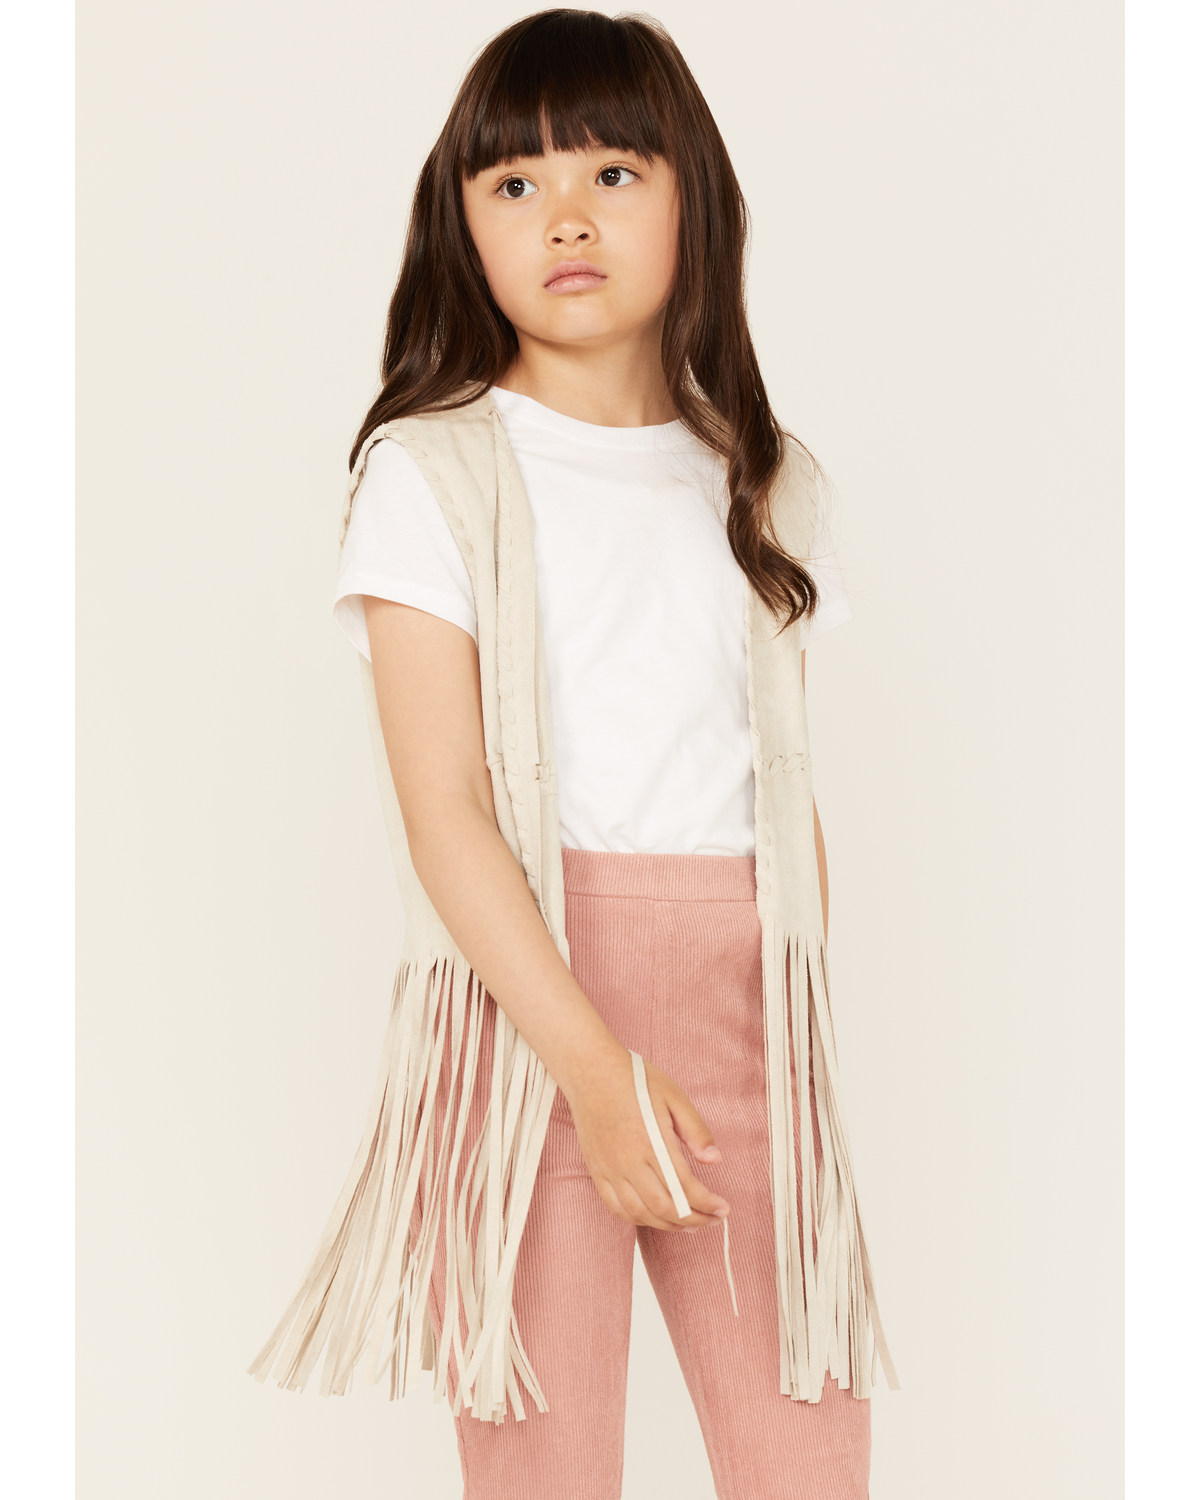 Fornia Girls' Fringe Faux Suede Vest